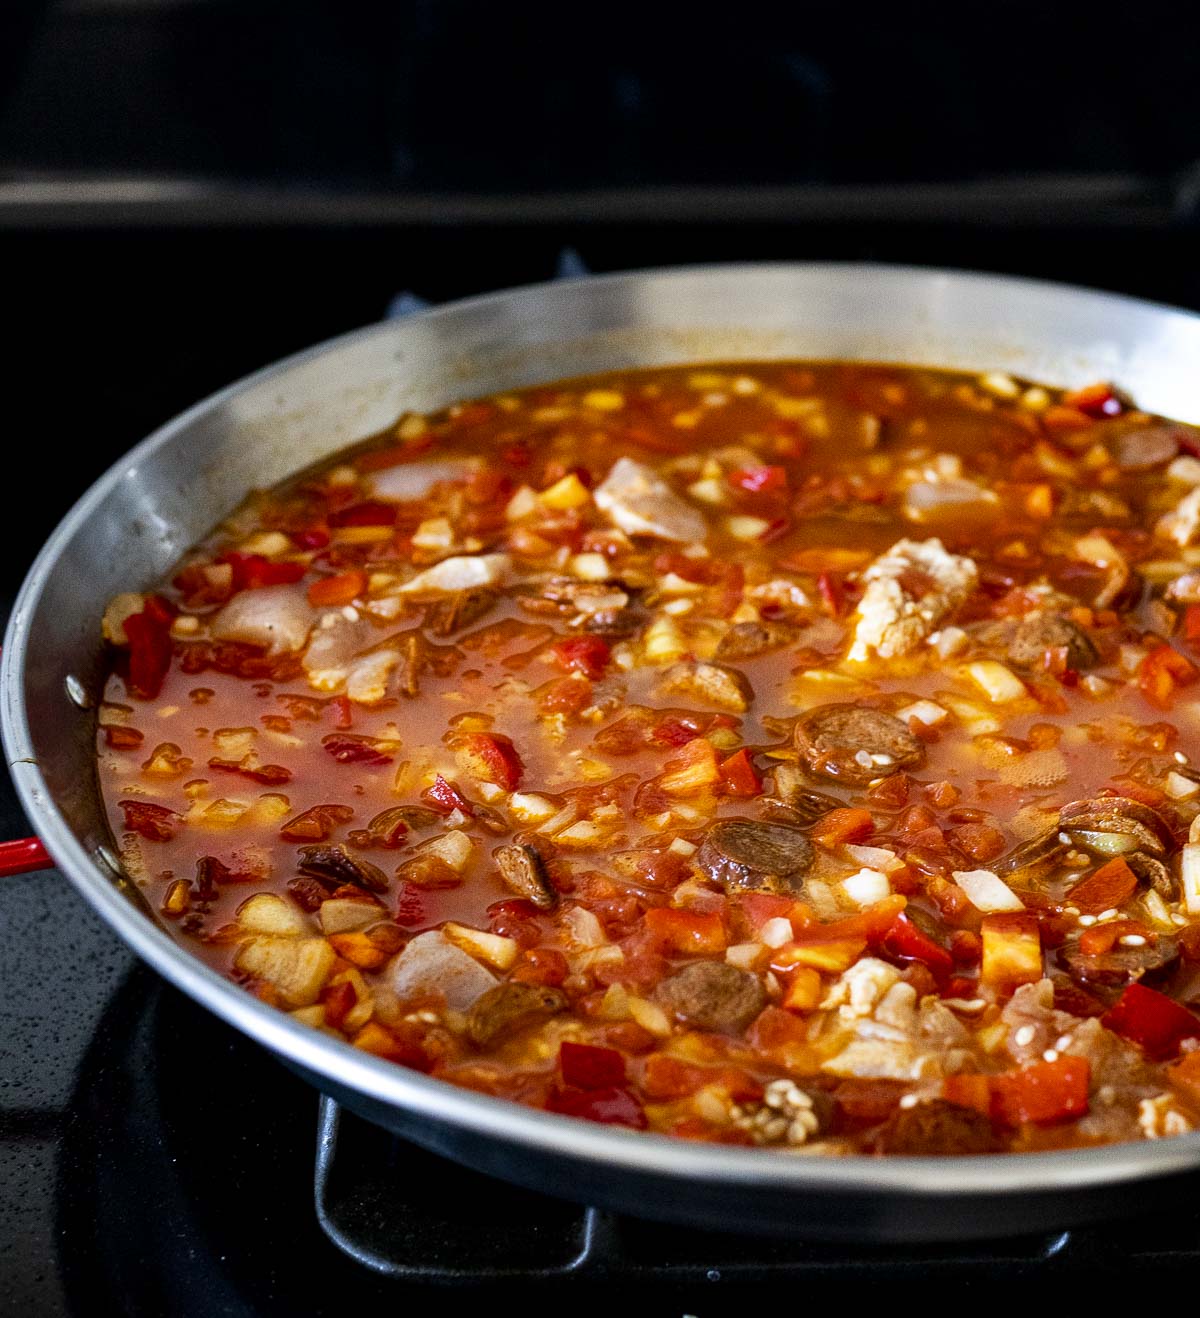 Paella simmering in a pan.